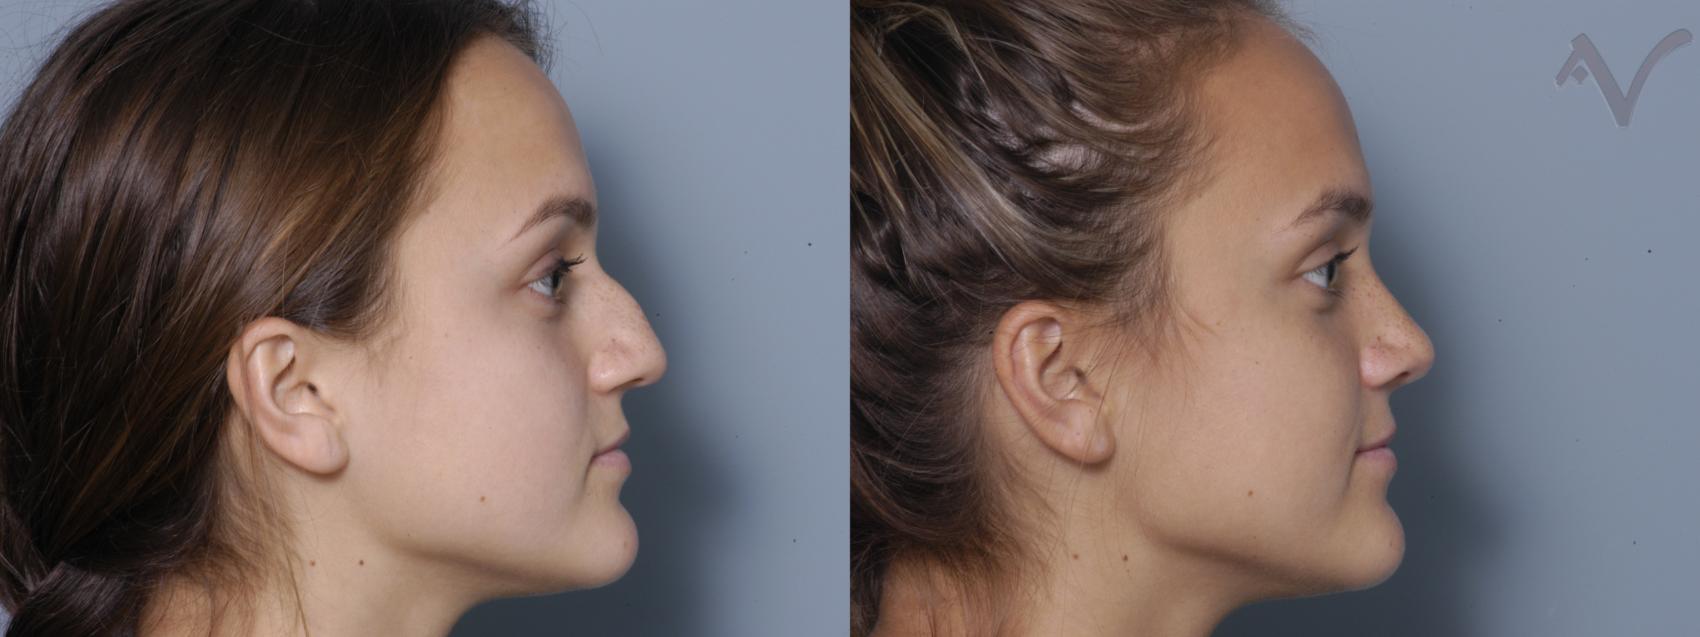 Before & After Rhinoplasty Case 3 Right Side View in Los Angeles, CA